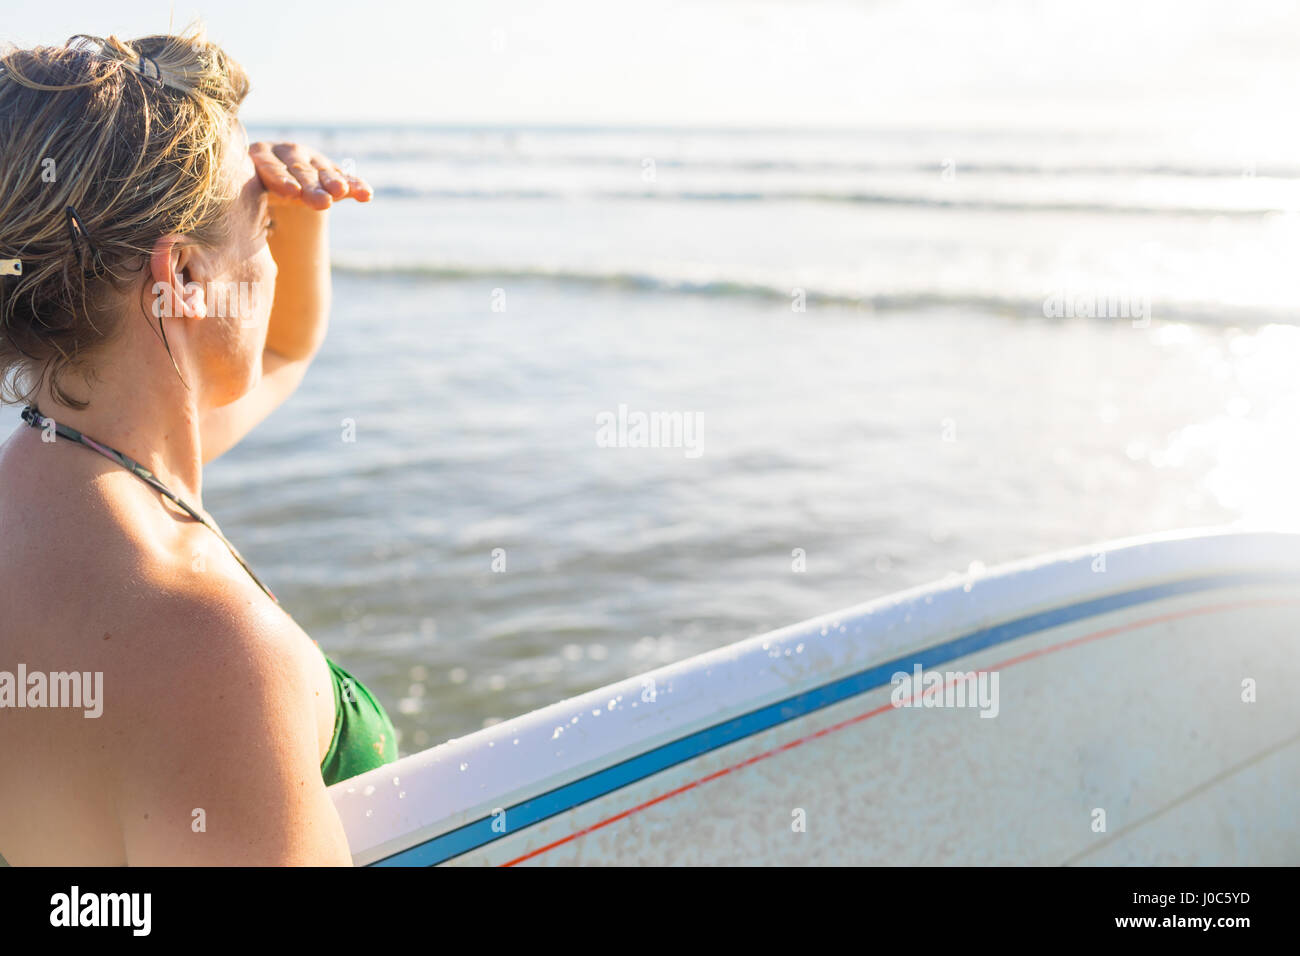 Woman carrying surfboard looking out to sea from beach, Nosara, Guanacaste Province, Costa Rica Stock Photo